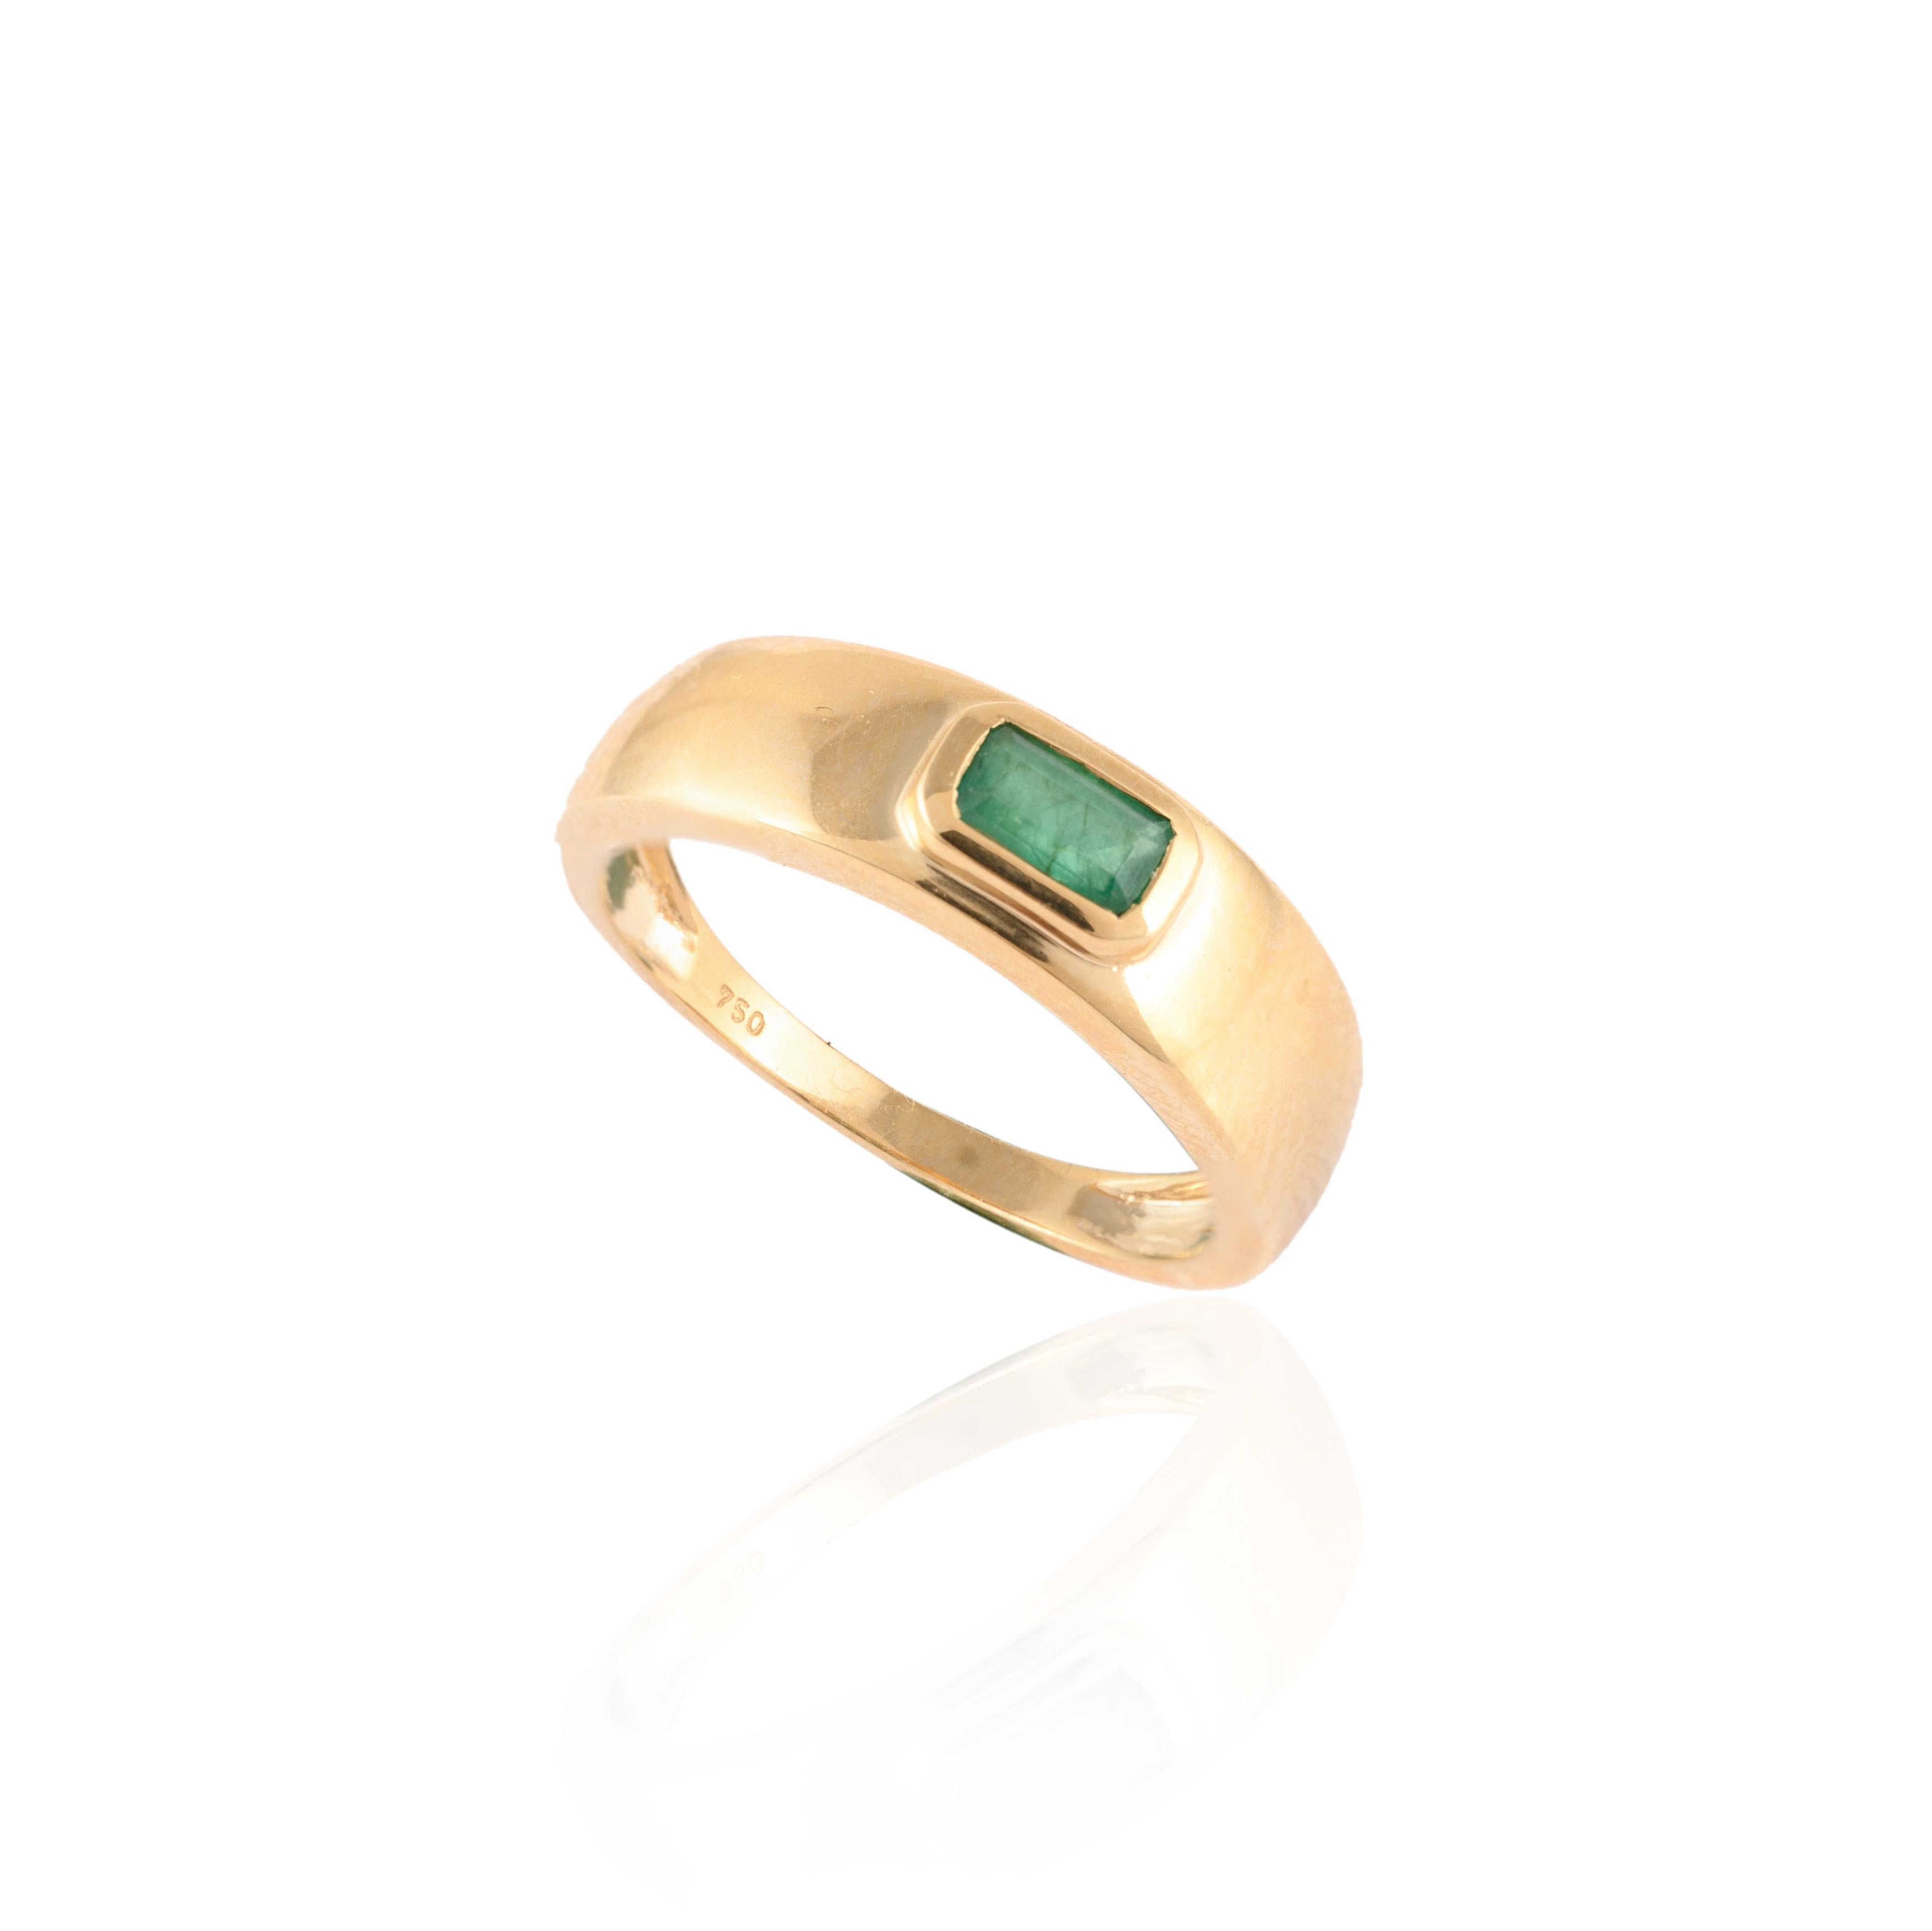 For Sale:  Unisex Natural Baguette Cut Emerald May Birthstone Ring in 18k Yellow Gold 8